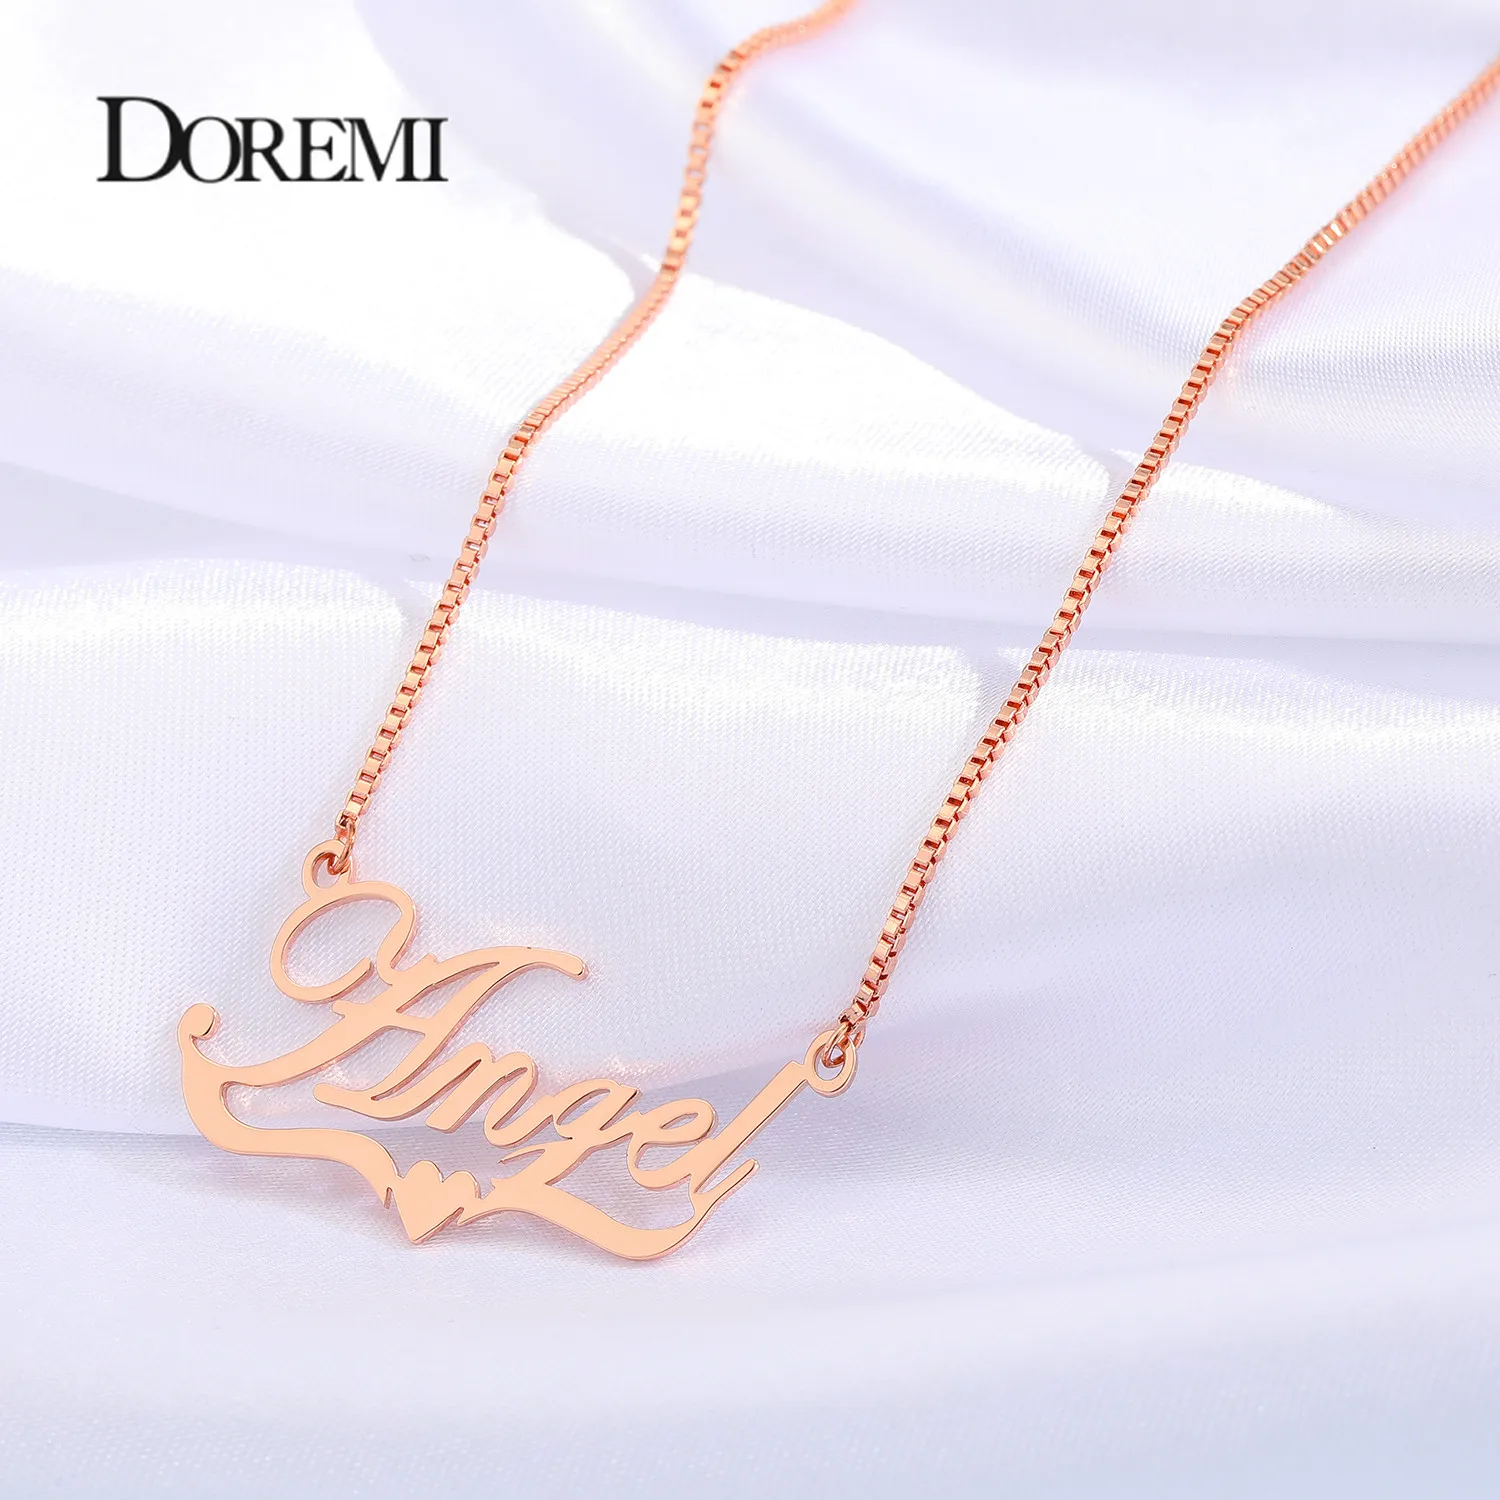 DOREMI Stainless Steel  Custom Name Necklace Personalized Name Pendant Heart Choker for Women Men Jewelry Valentine's Day Gift doremi 14k gold mini initial letter necklace yours story caps name necklace tiny heart valentine s day gift initial necklace